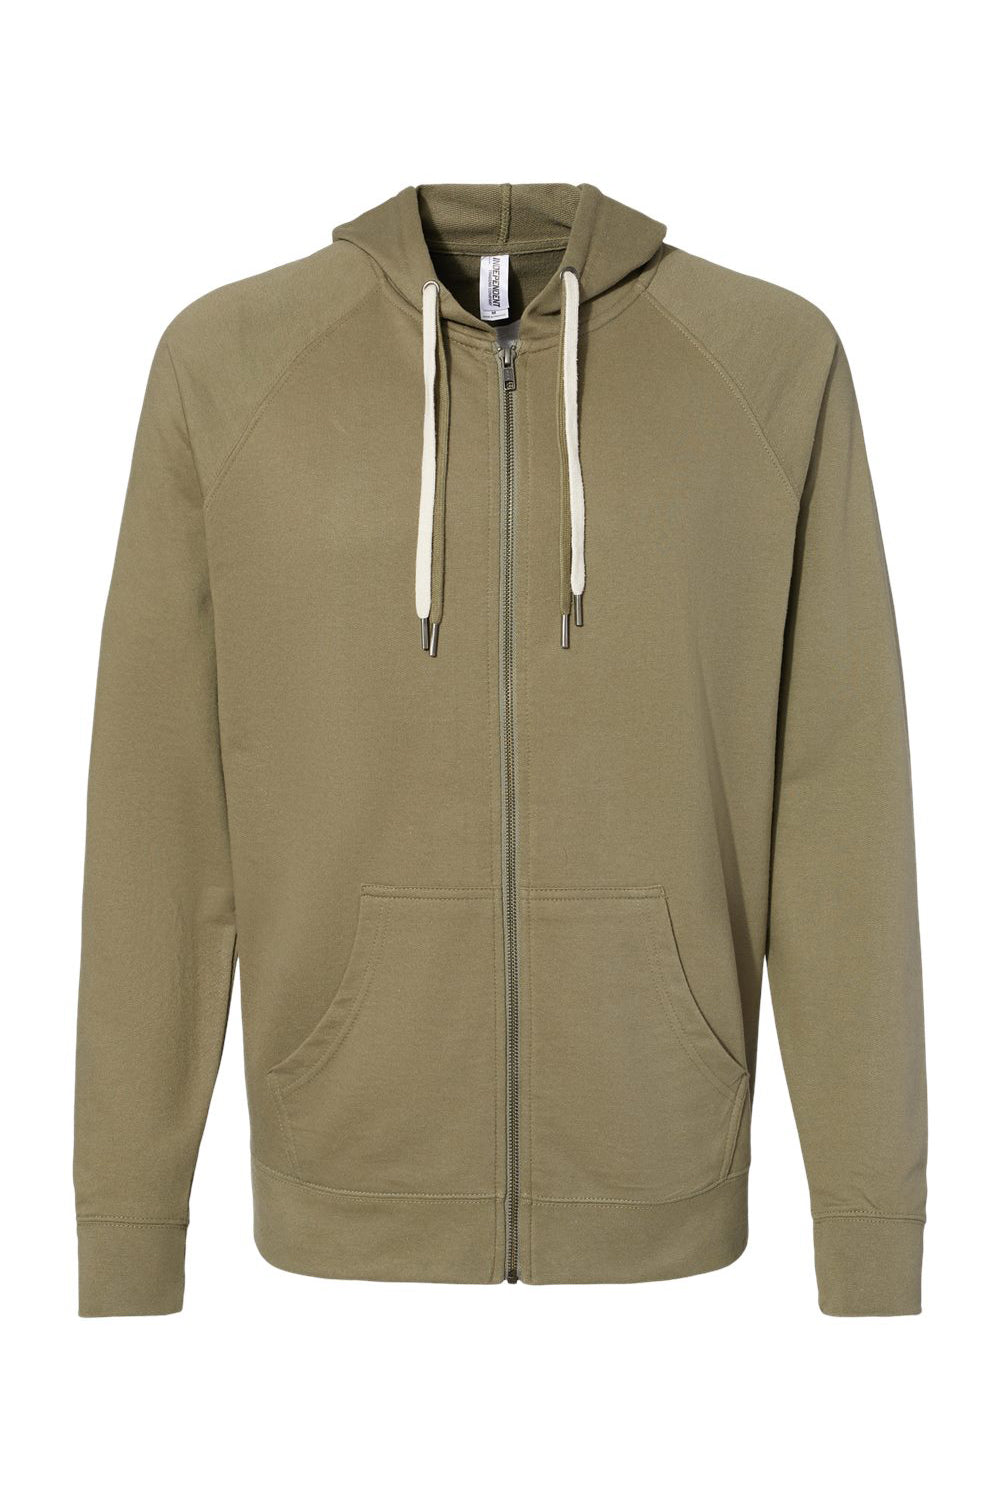 Independent Trading Co. SS1000Z Mens Icon Loopback Terry Full Zip Hooded Sweatshirt Hoodie Olive Green Flat Front